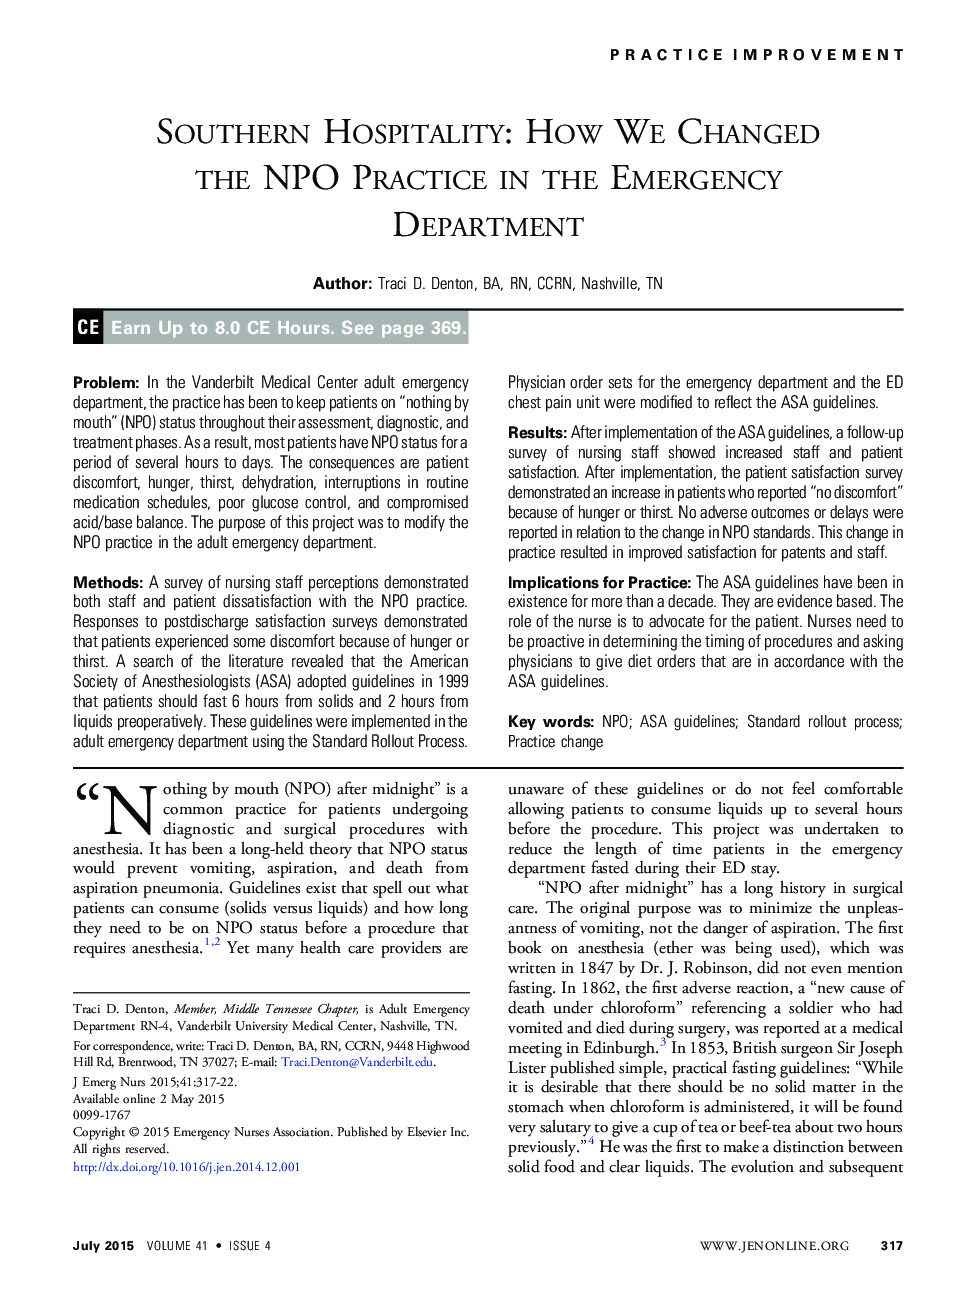 Southern Hospitality: How We Changed the NPO Practice in the Emergency Department 